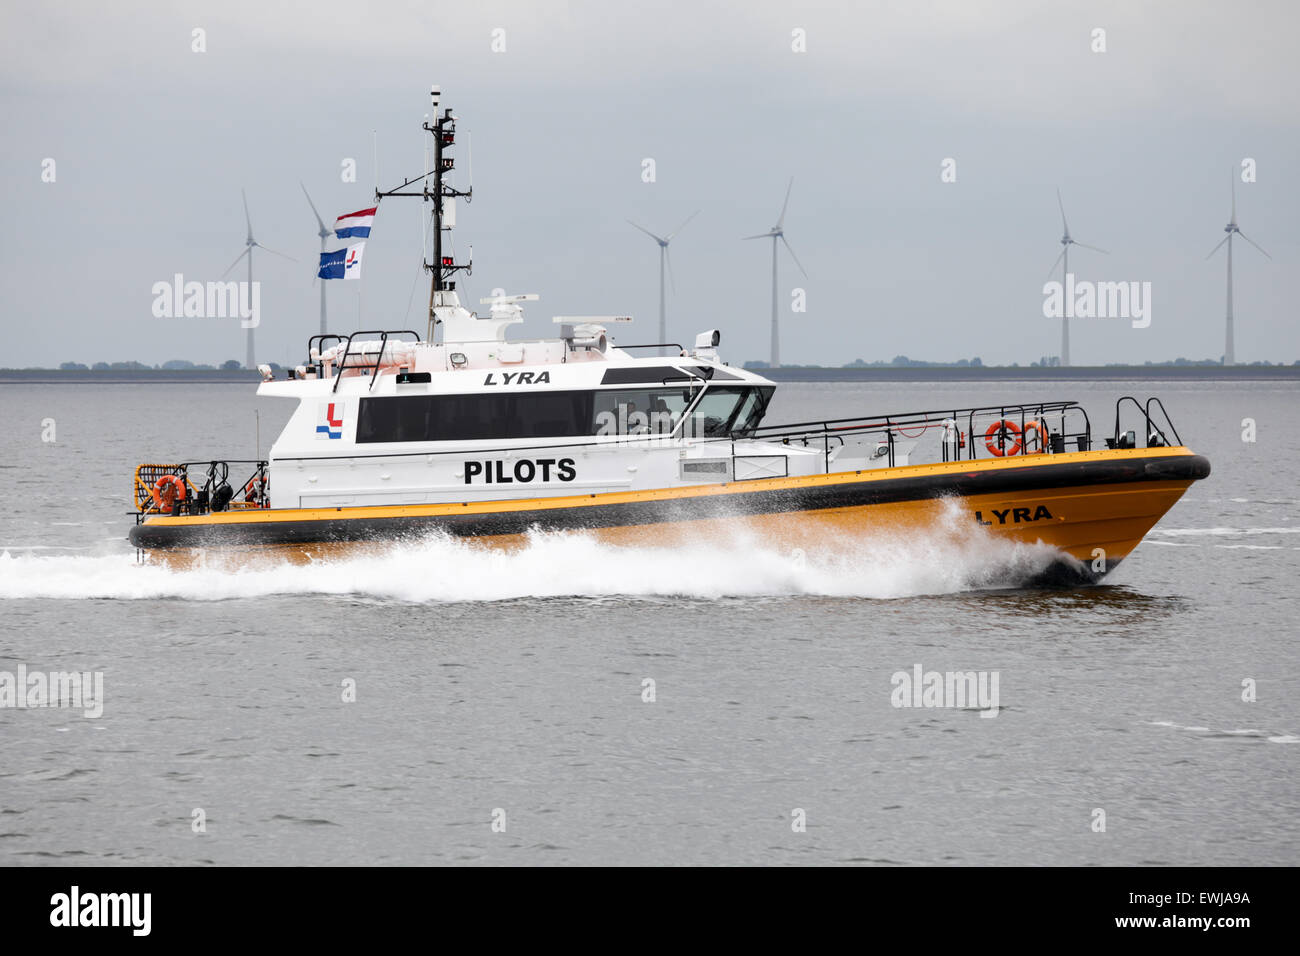 A pilot Boat 'Lyra' passing Eemshaven in the Netherlands Stock Photo